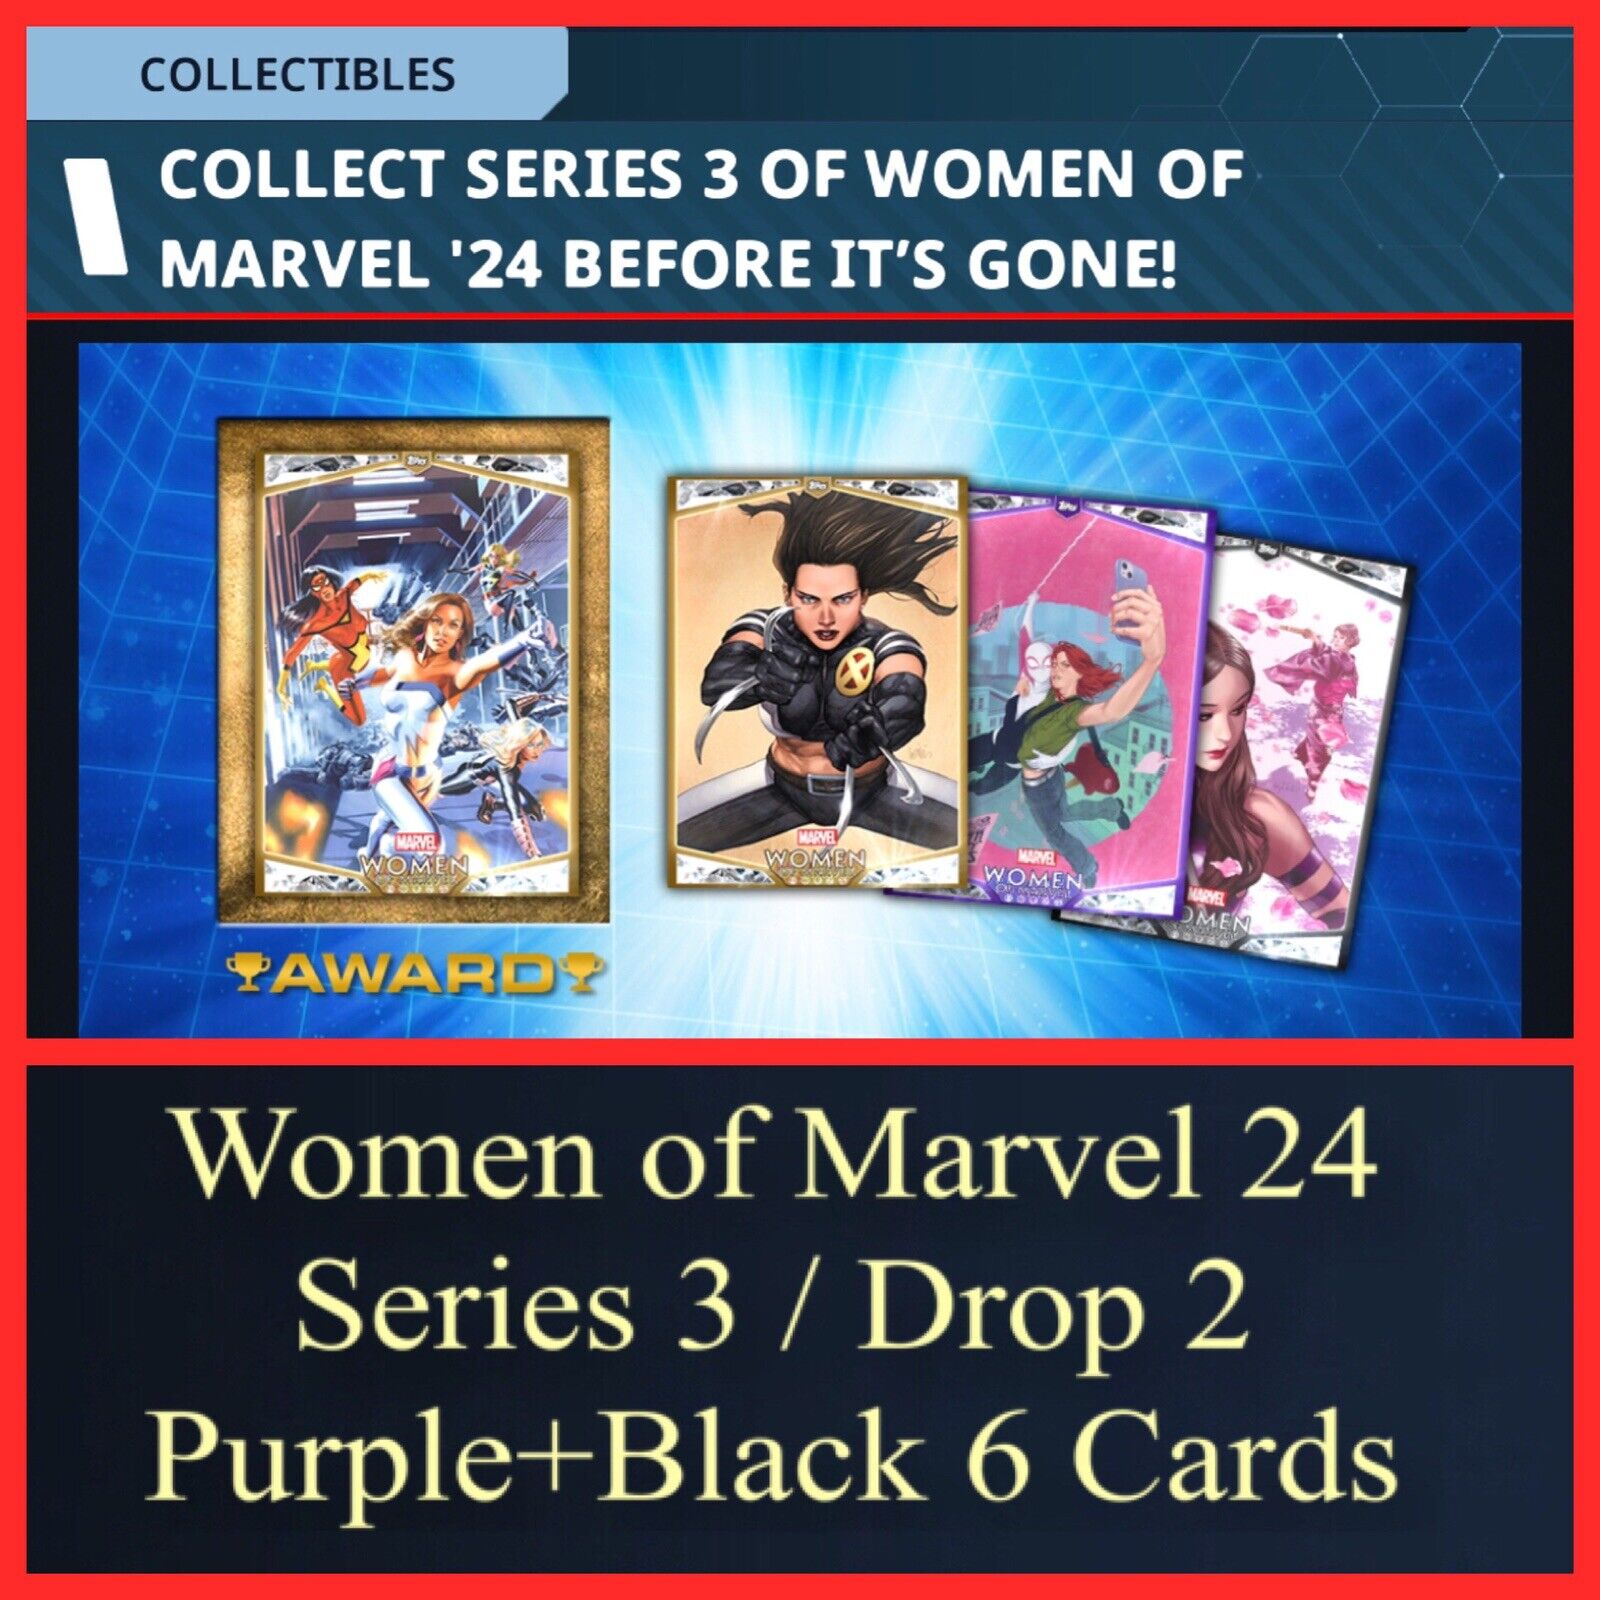 WOMEN OF MARVEL ‘24-SERIES 3/DROP 2 PURPLE+BLACK 6 CARDS-TOPPS MARVEL COLLECT